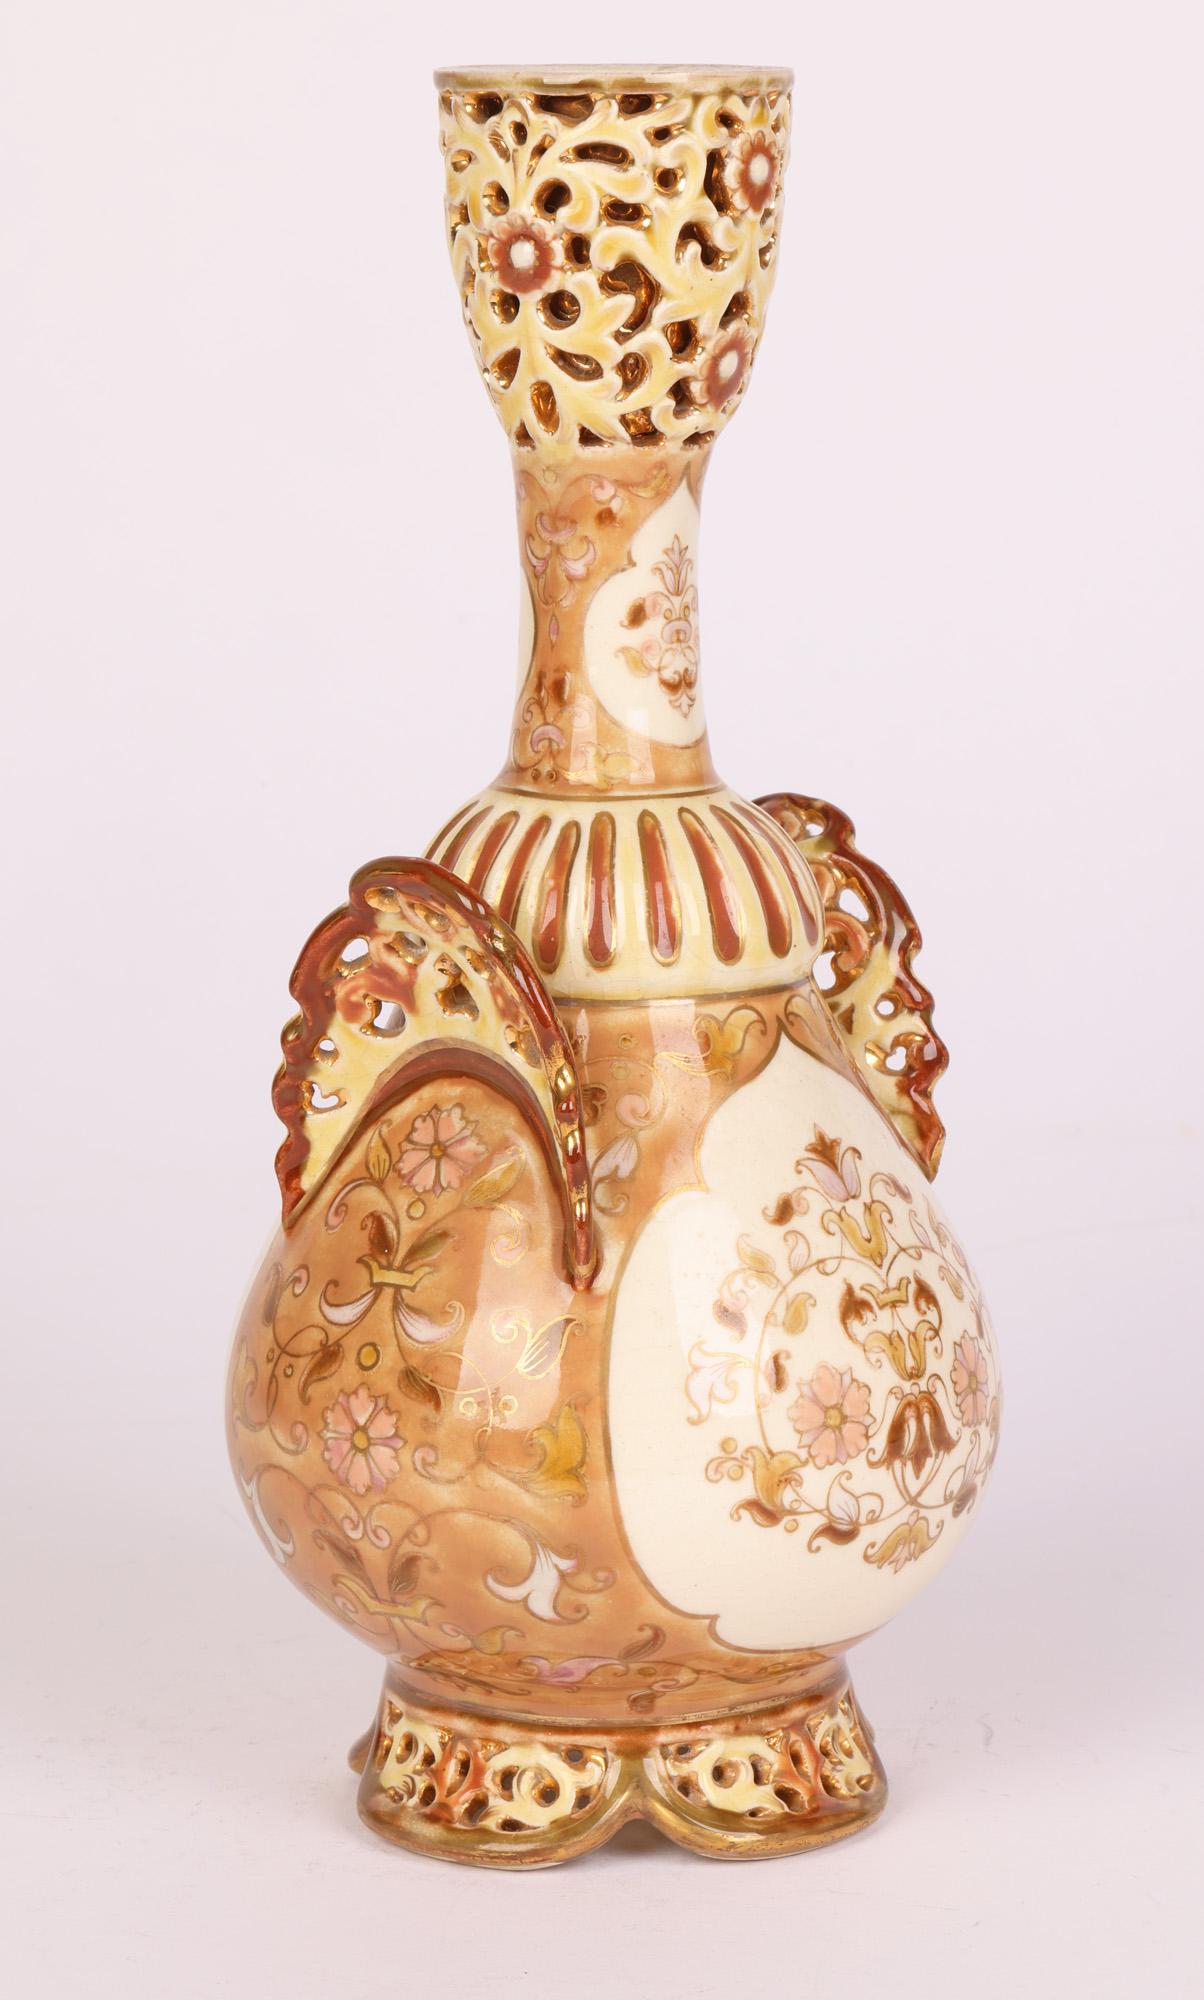 Zsolnay Hungarian Islamic Influence Floral Painted Porcelain Vase For Sale 6